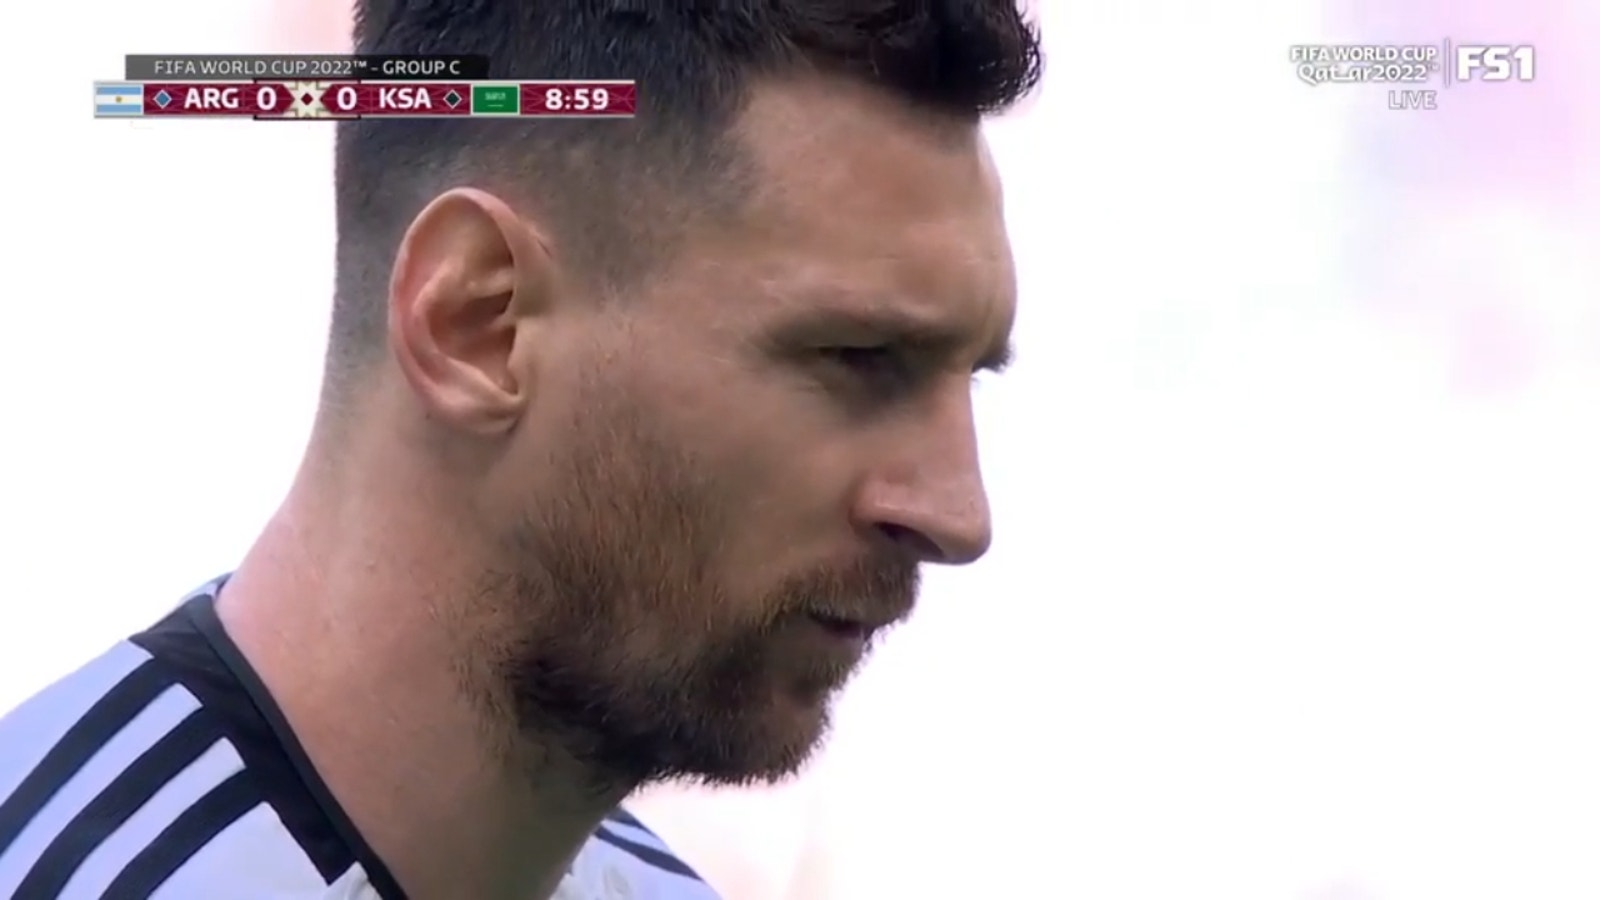 Lionel Messi scores a PK in the 10th minute for Argentina to take a 1-0 lead over Saudi Arabia.